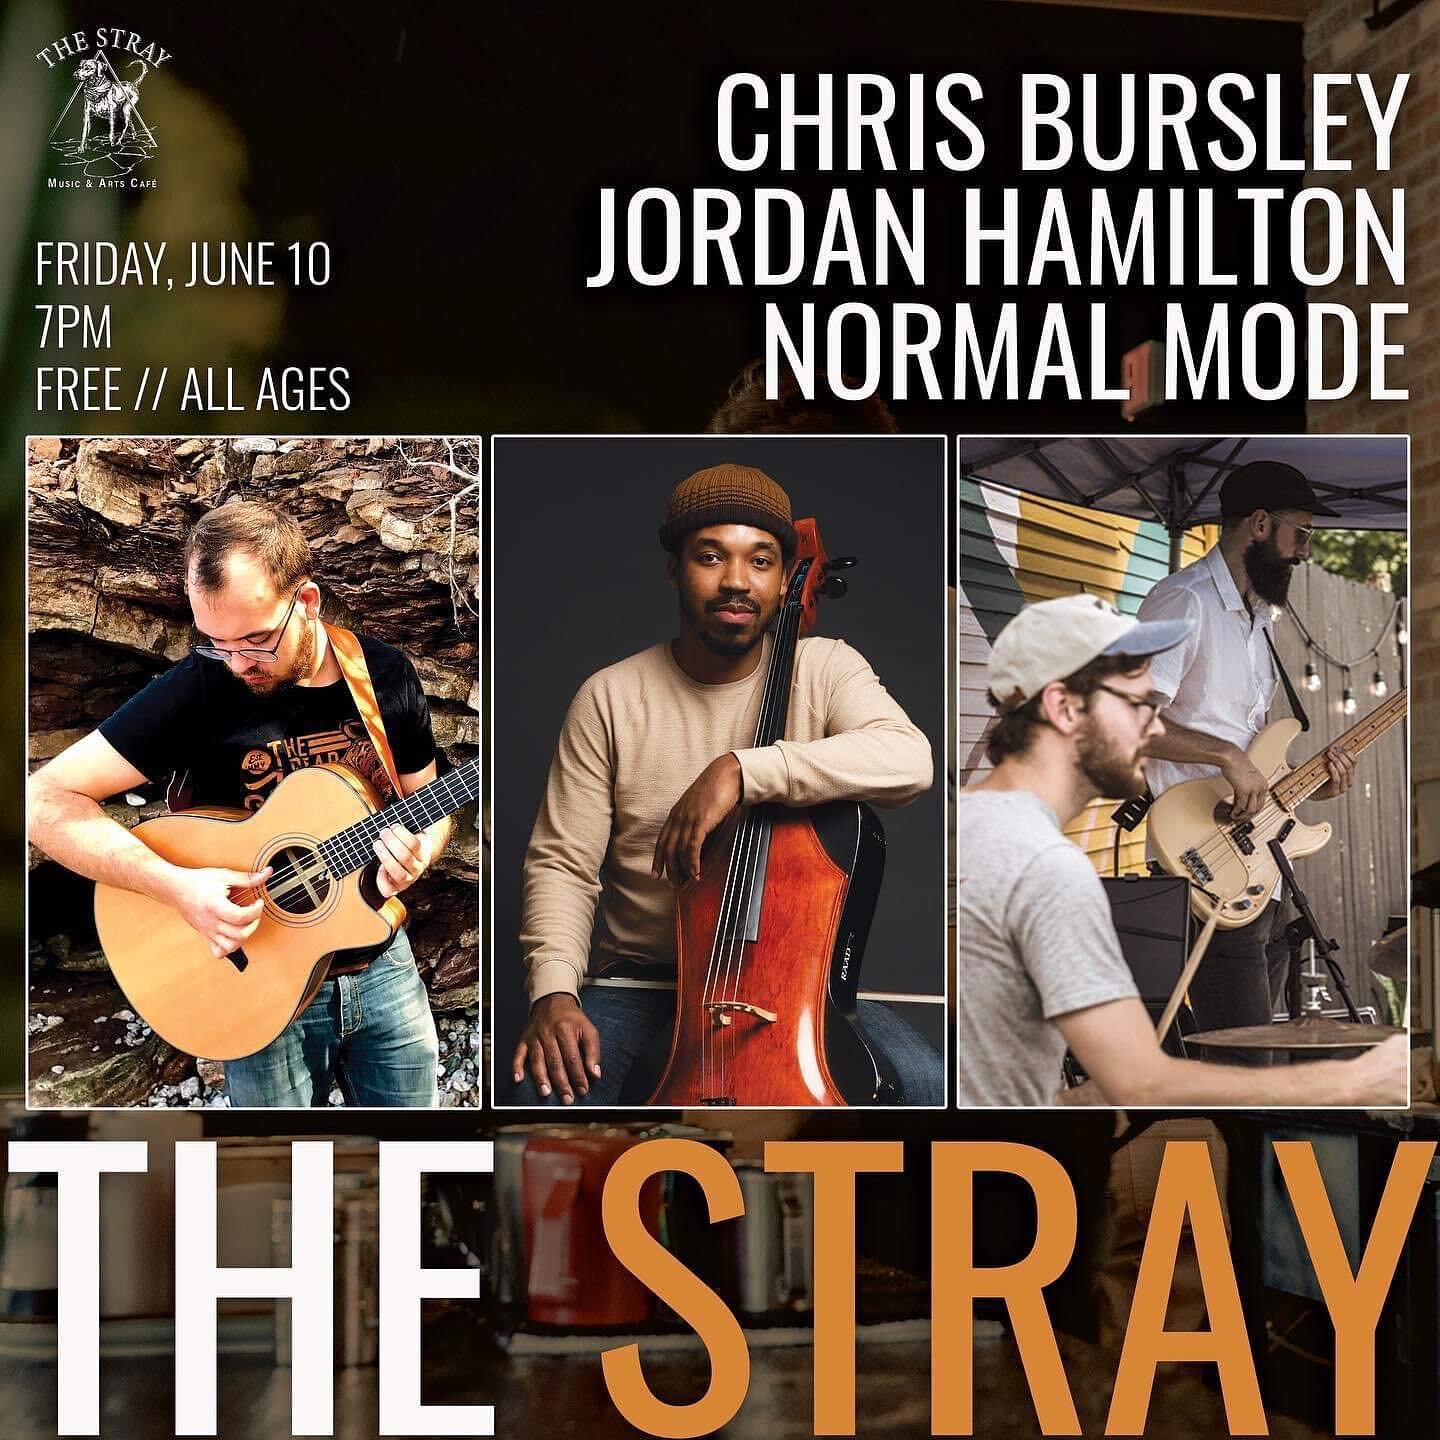 TOMORROW!

Catch Normal Mode alongside Chris Bursley (Loekella) and Jordan Hamilton LIVE at The Stray in Grand Rapids!

7-9:30 pm is when it all goes down, see you there! 🪐✨🎶